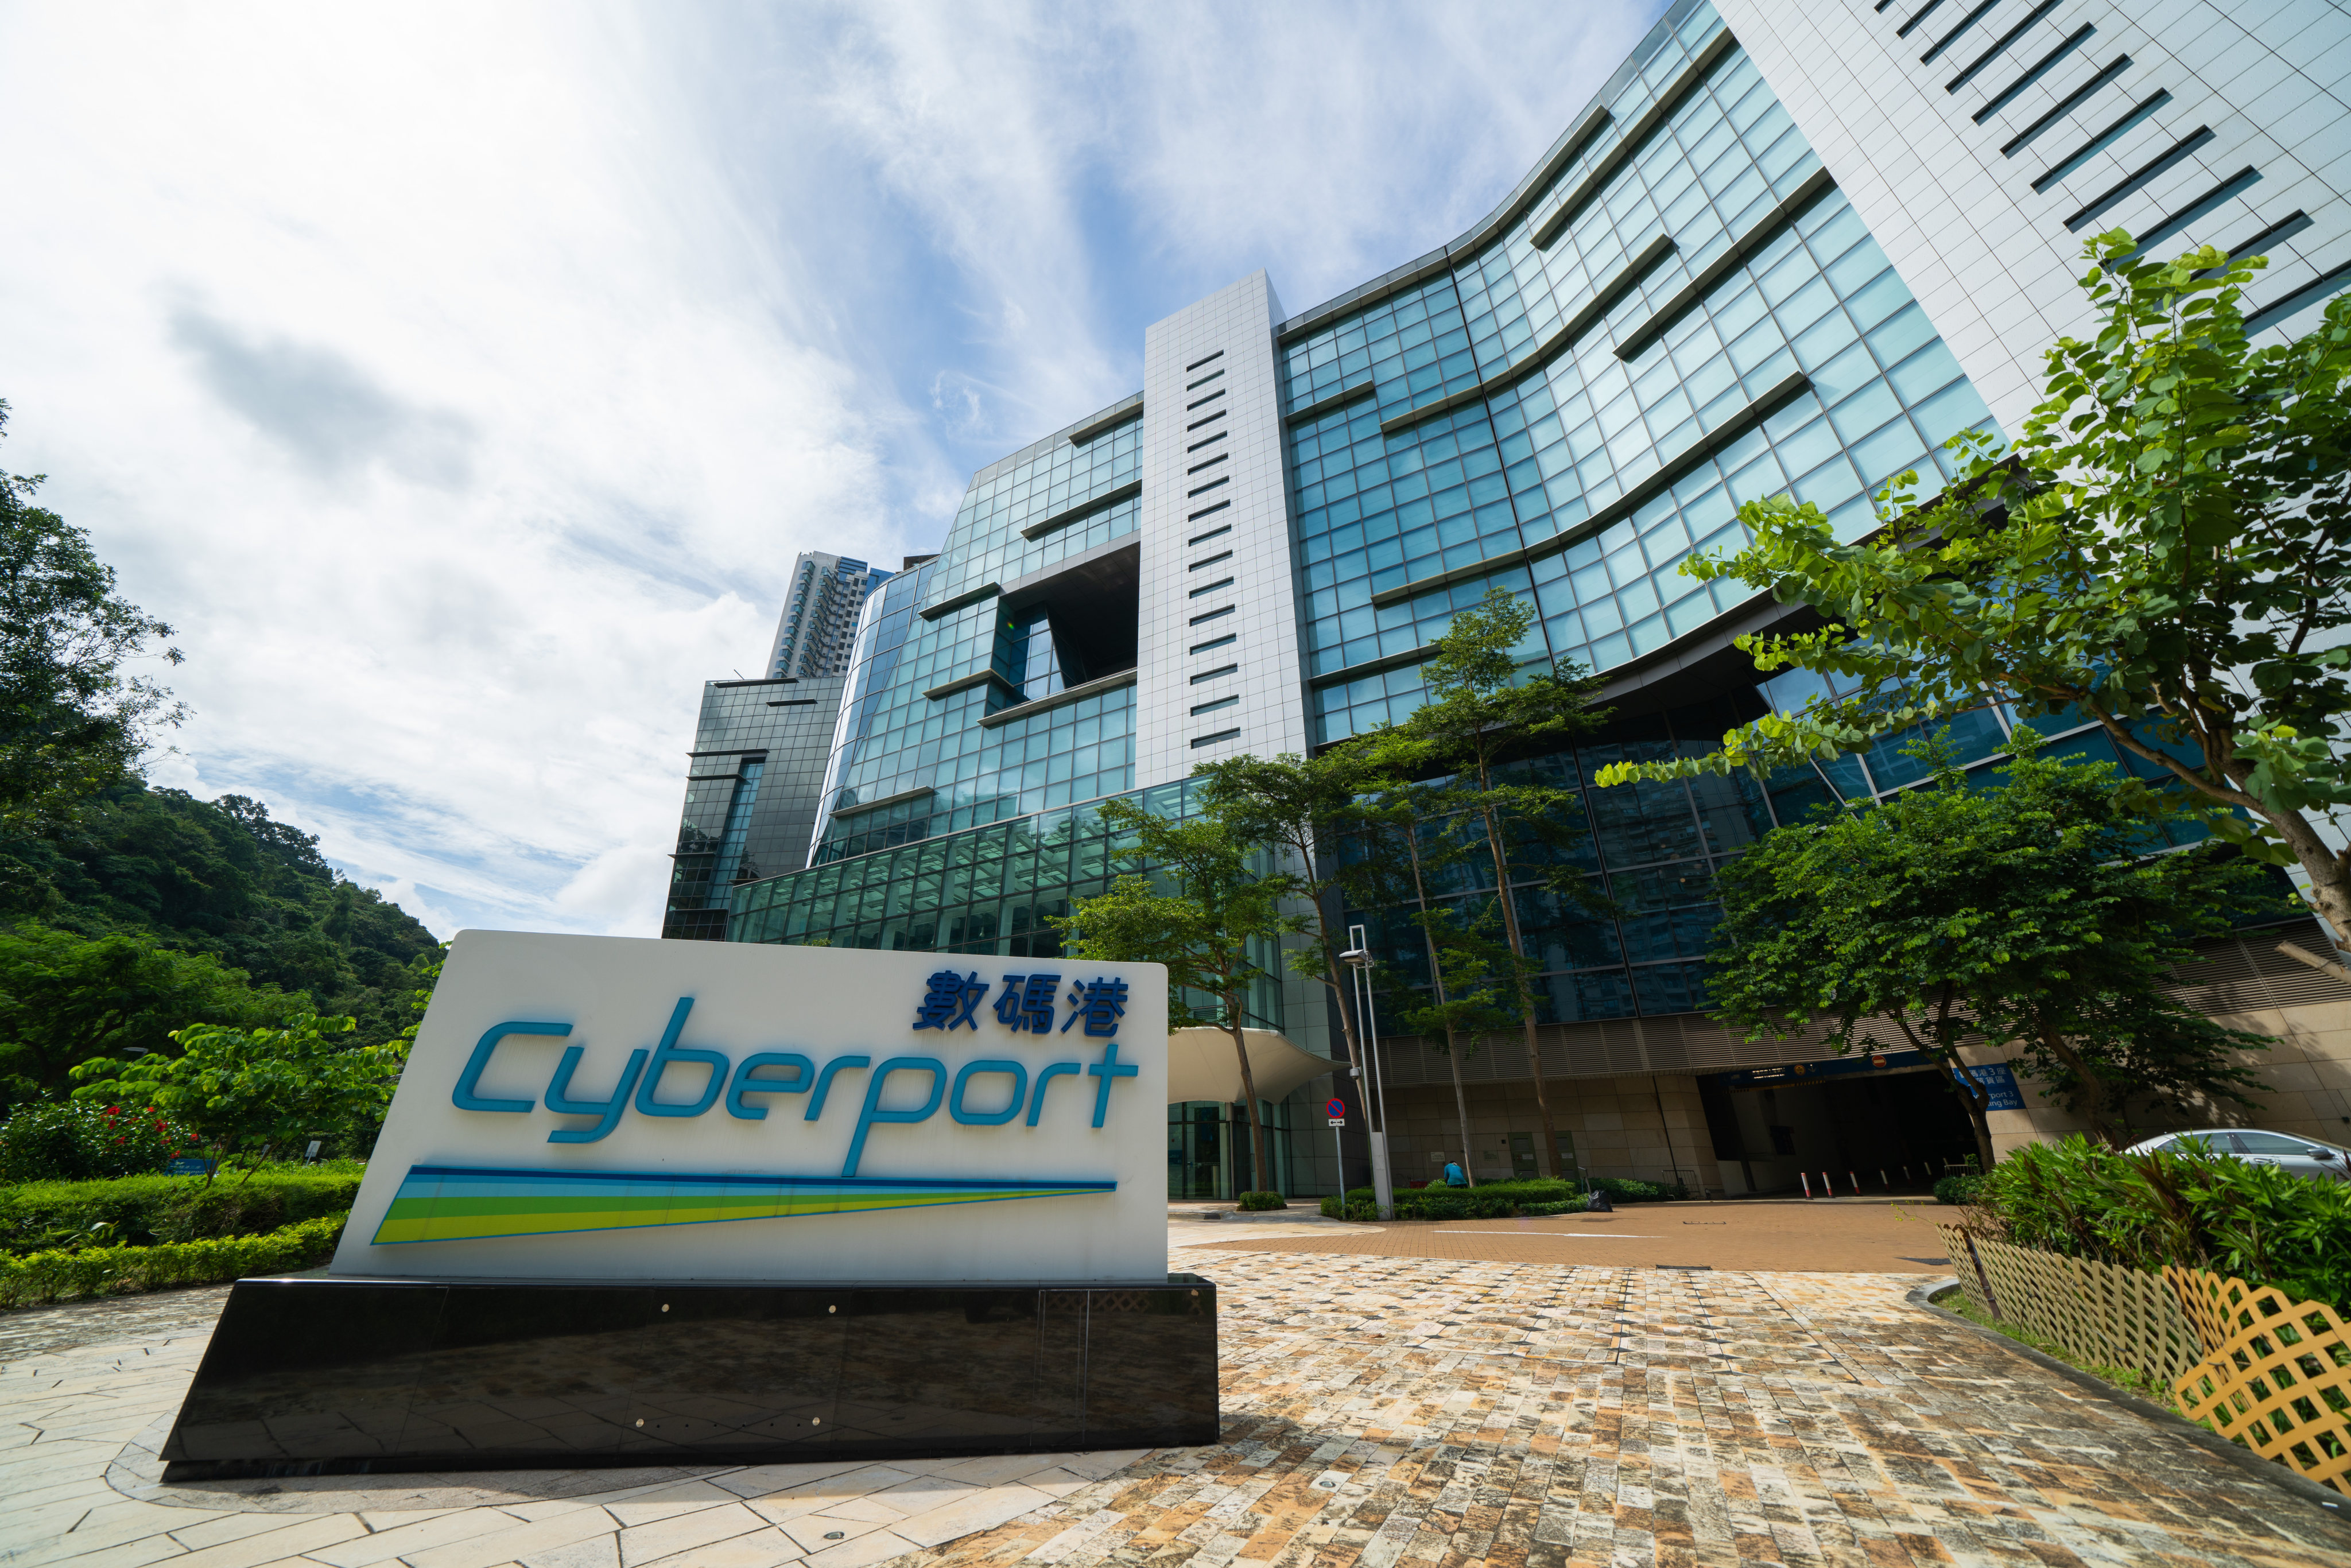 Cyberport reported last week that 400GB of files, including sensitive personal data belonging to employees, had been syphoned off by hackers in the middle of August. Photo: Cyberport